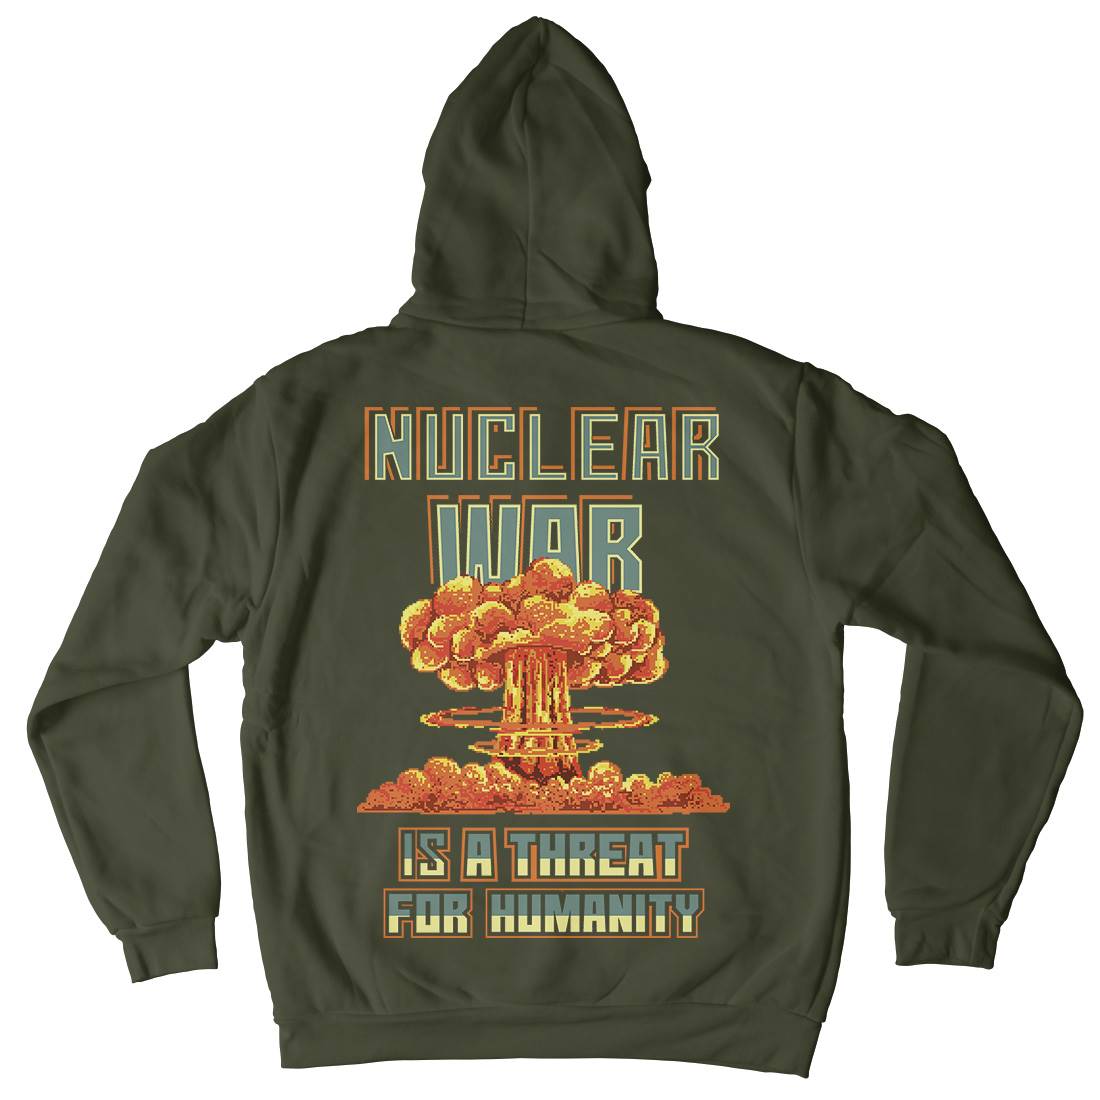 Nuclear War Is A Threat For Humanity Kids Crew Neck Hoodie Army B941